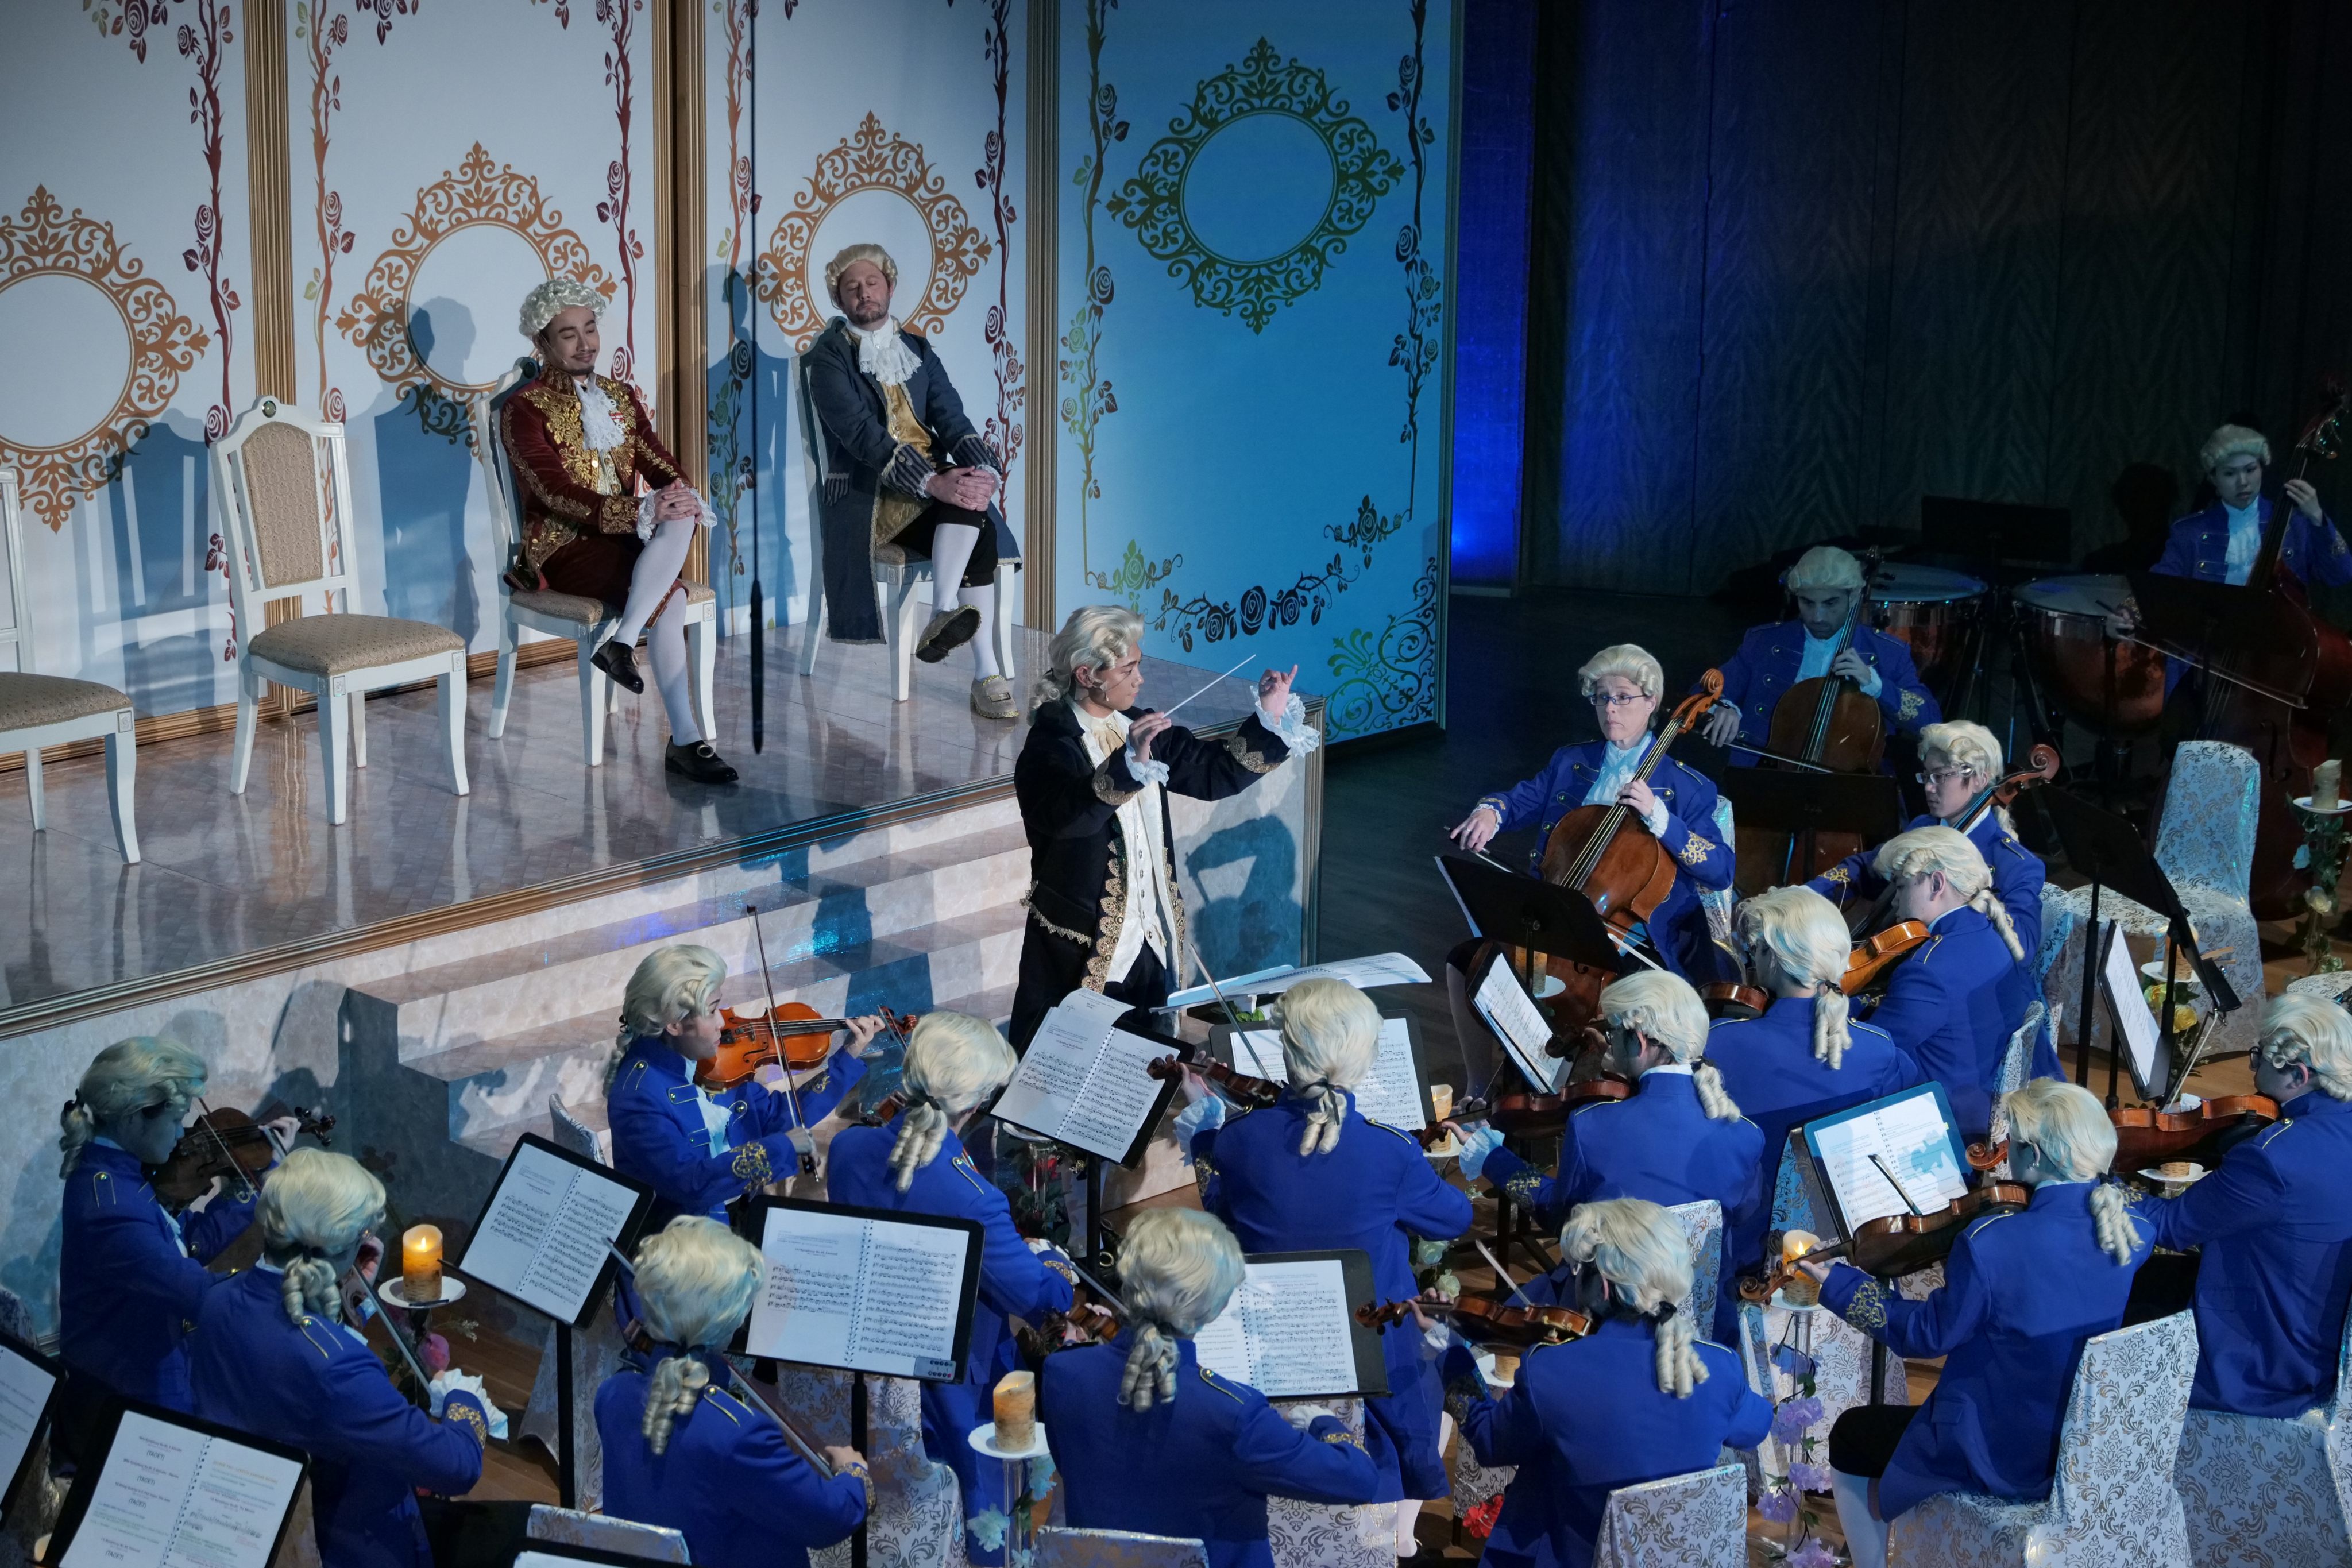 Bewigged and in blue frock coats - as the musicians of Joseph Haydn’s employer Prince Esterhazy’s court orchestra were - players of the City Chamber Orchestra of Hong Kong perform music by the Austrian composer under the baton of Philip Chu as Haydn. Photo: CCOHK